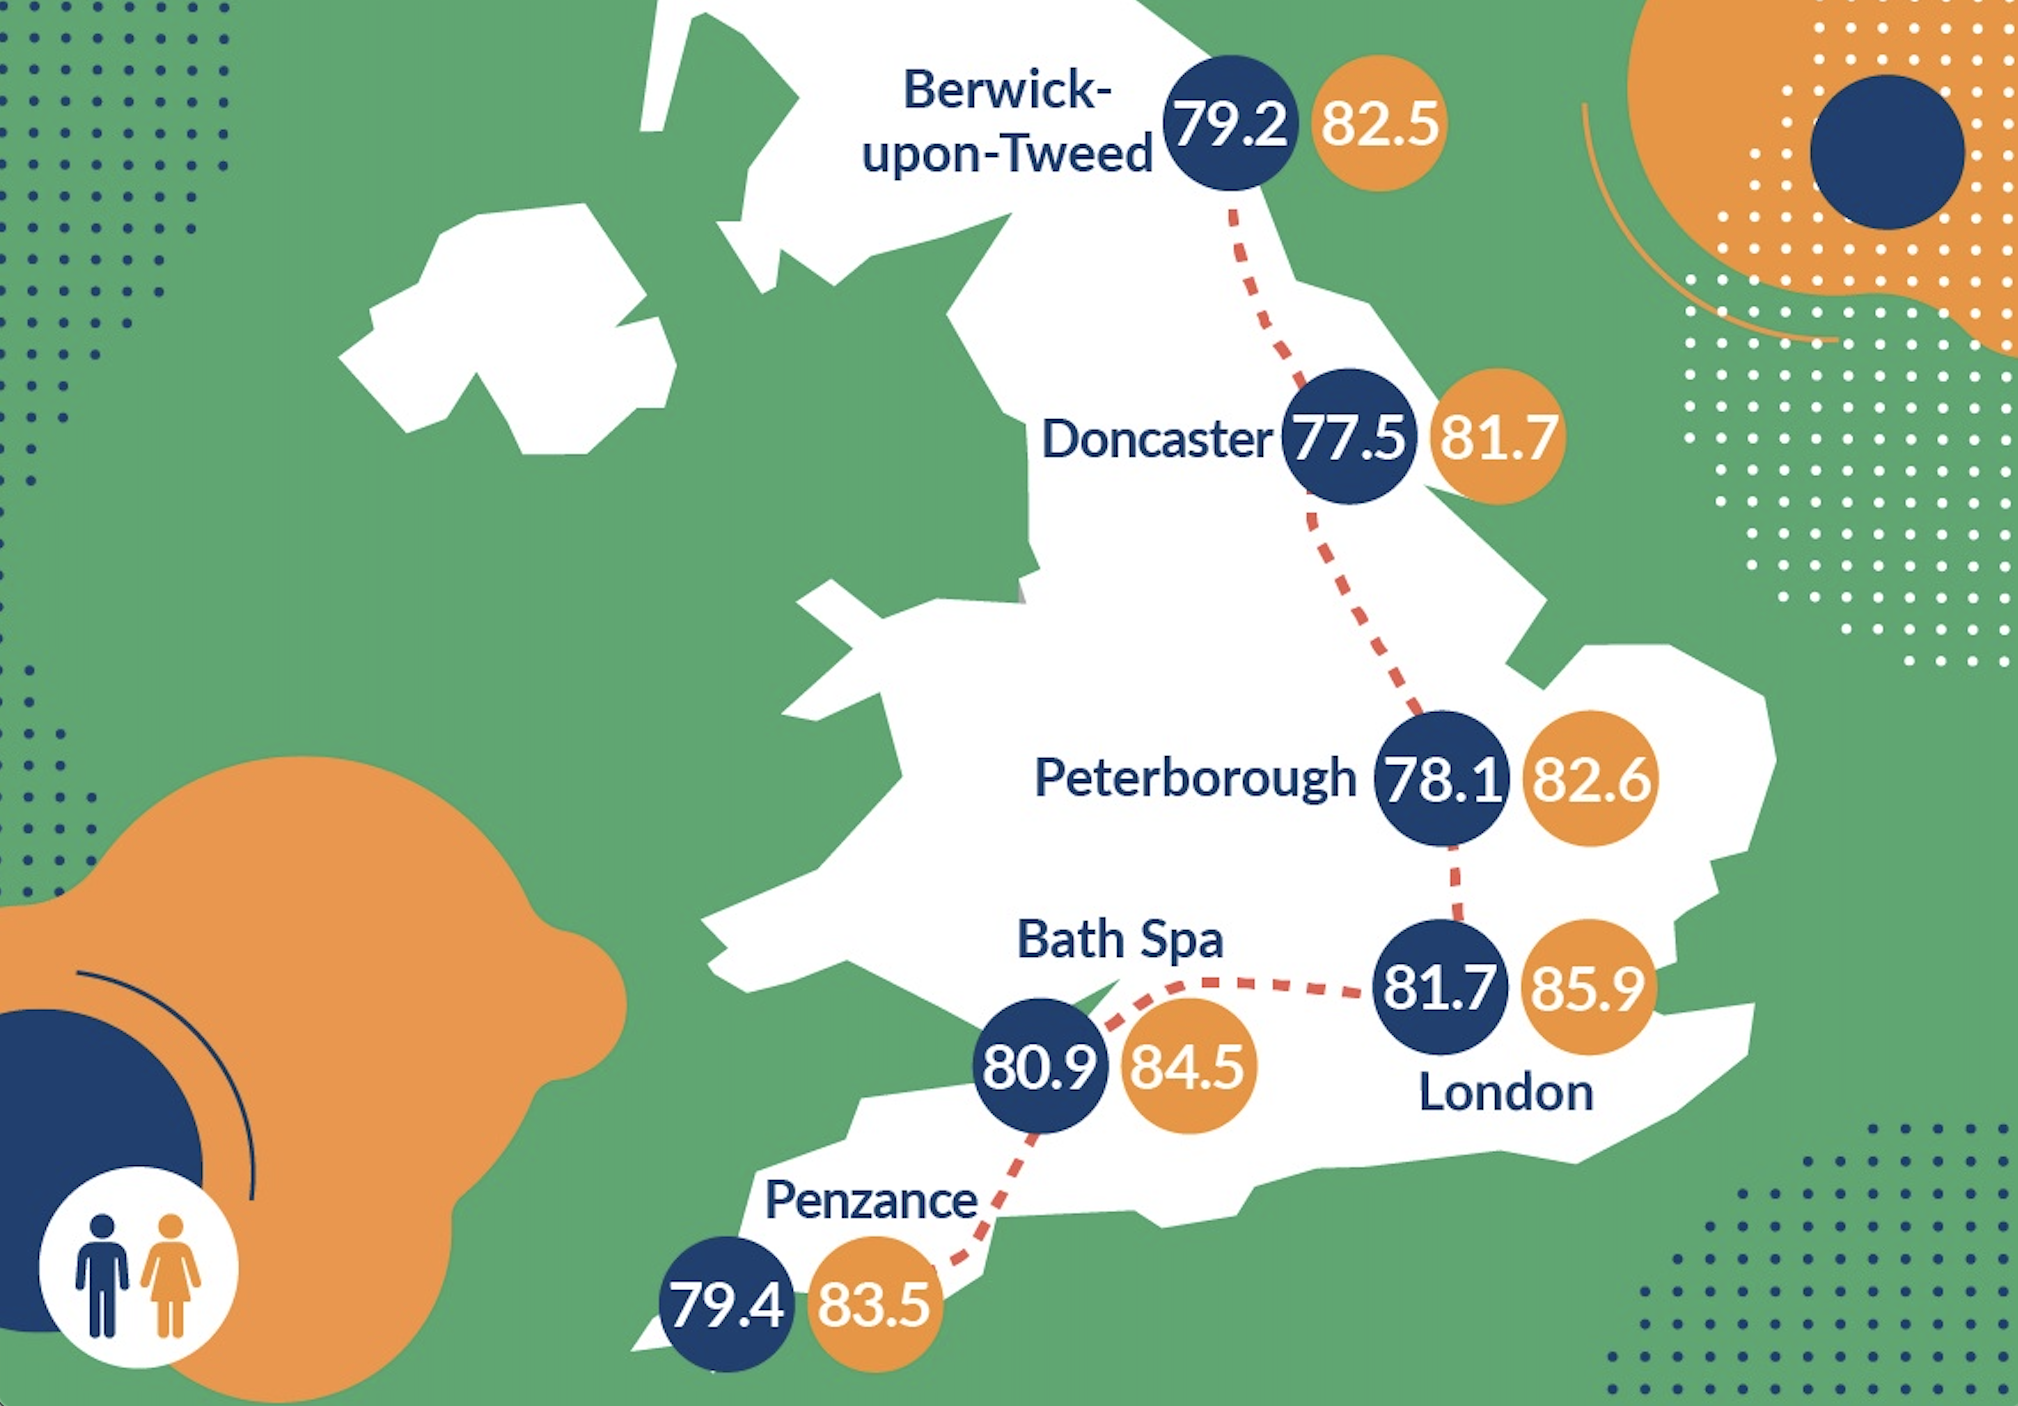 Life expectancy of (men and women): Berwick on Tweed (79 and 82), Doncaster (77 and 81) , Peterborough (78 and 82), Bath (80 and 84), London (81 and 85), Penzance (79 and 83)